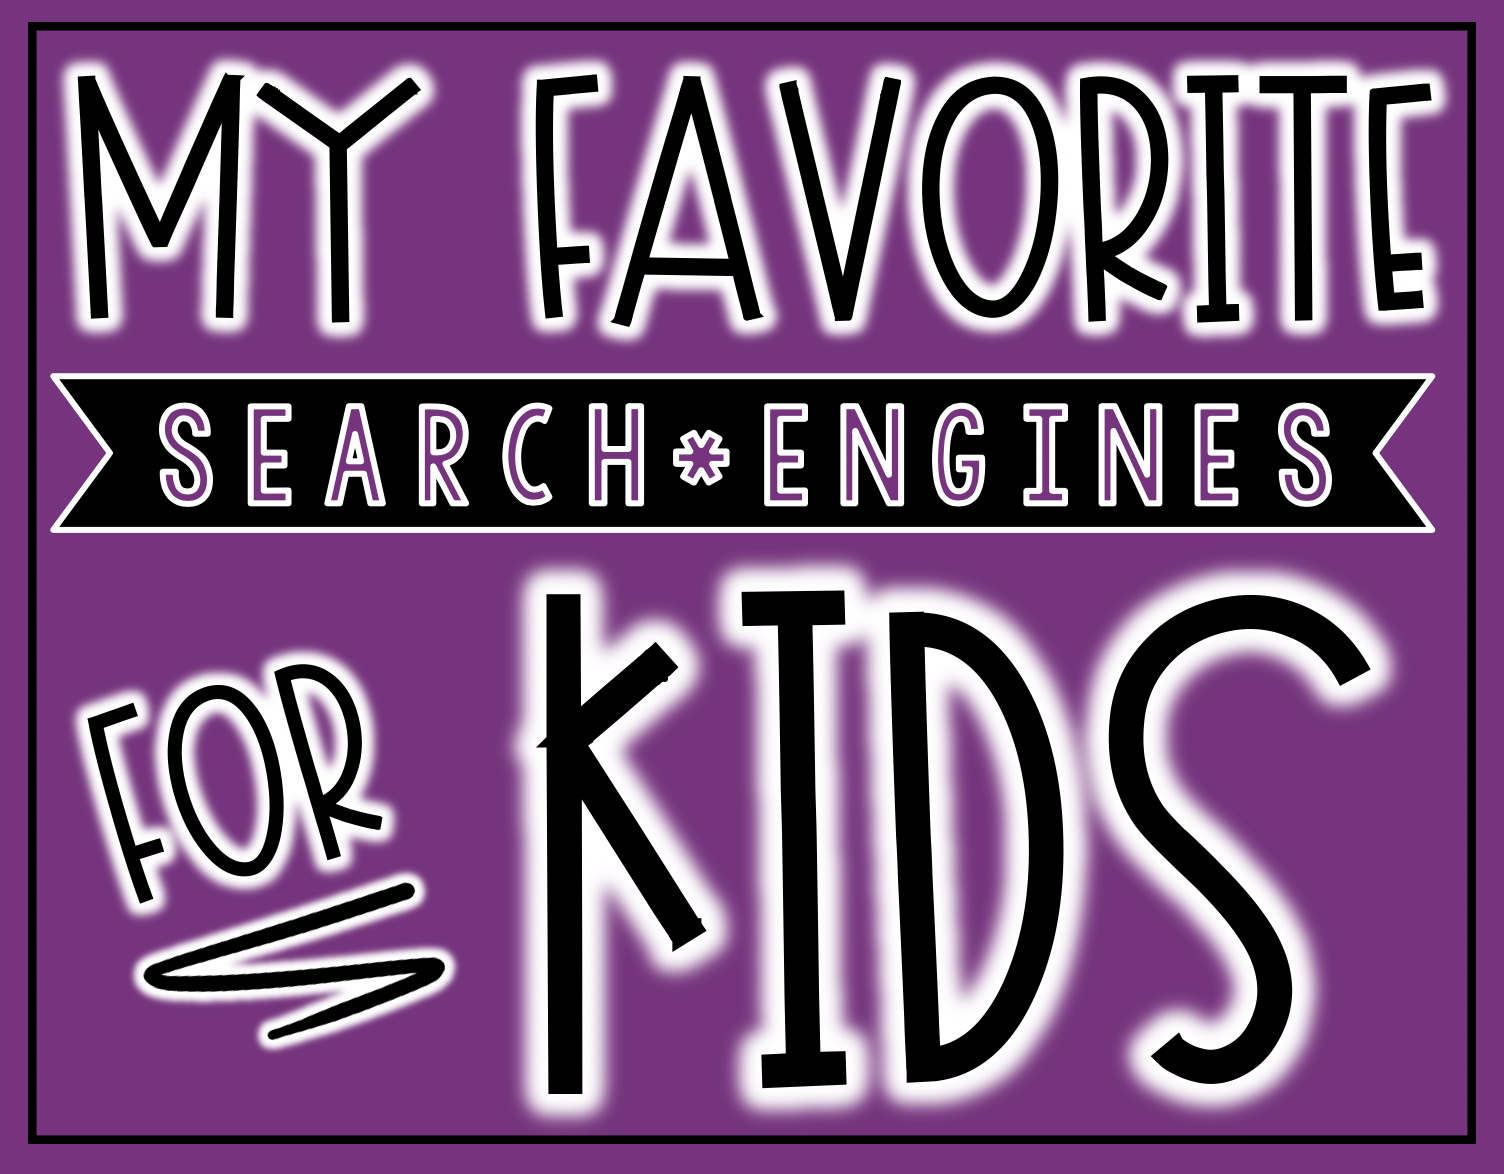 My favorite search engines for kids and elementary students to use for safe online research.